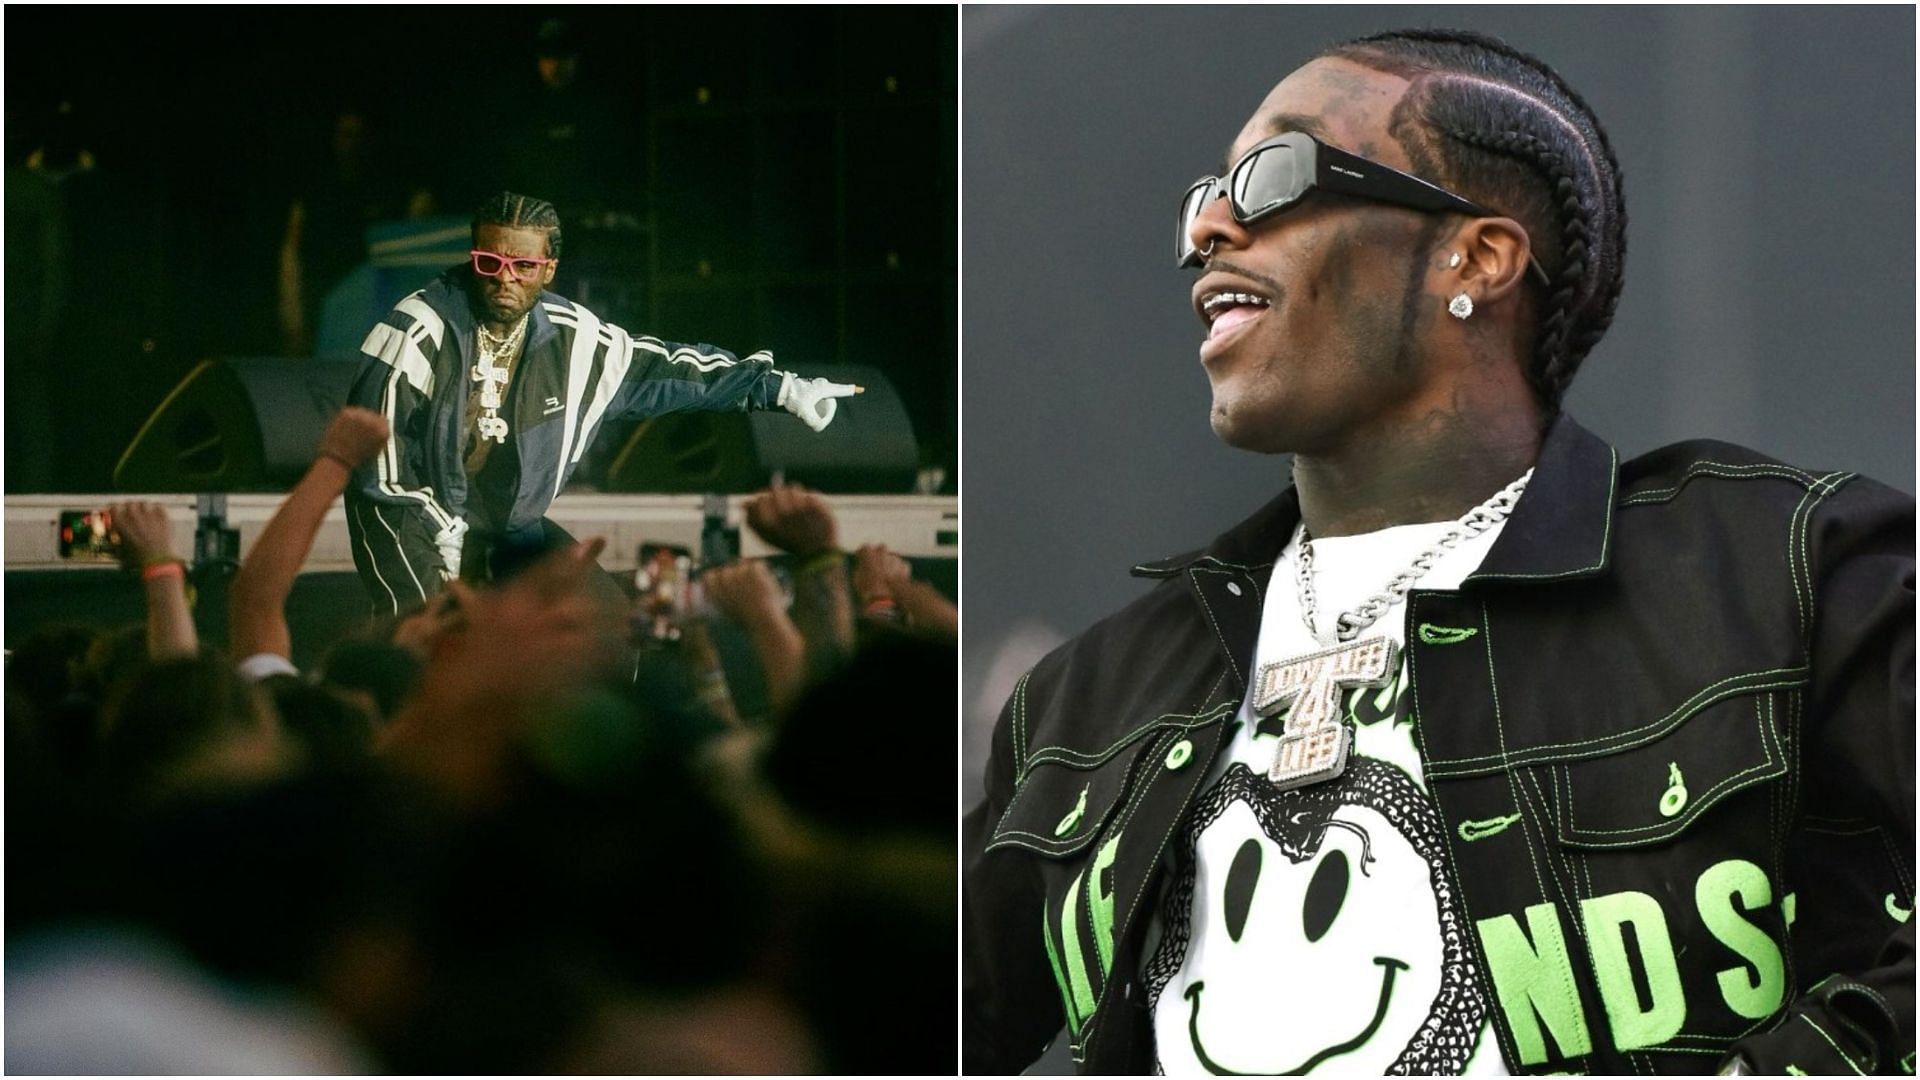 Lil Uzi Vert recently dealt with a fan on stage. (Images via Instagram and Getty)